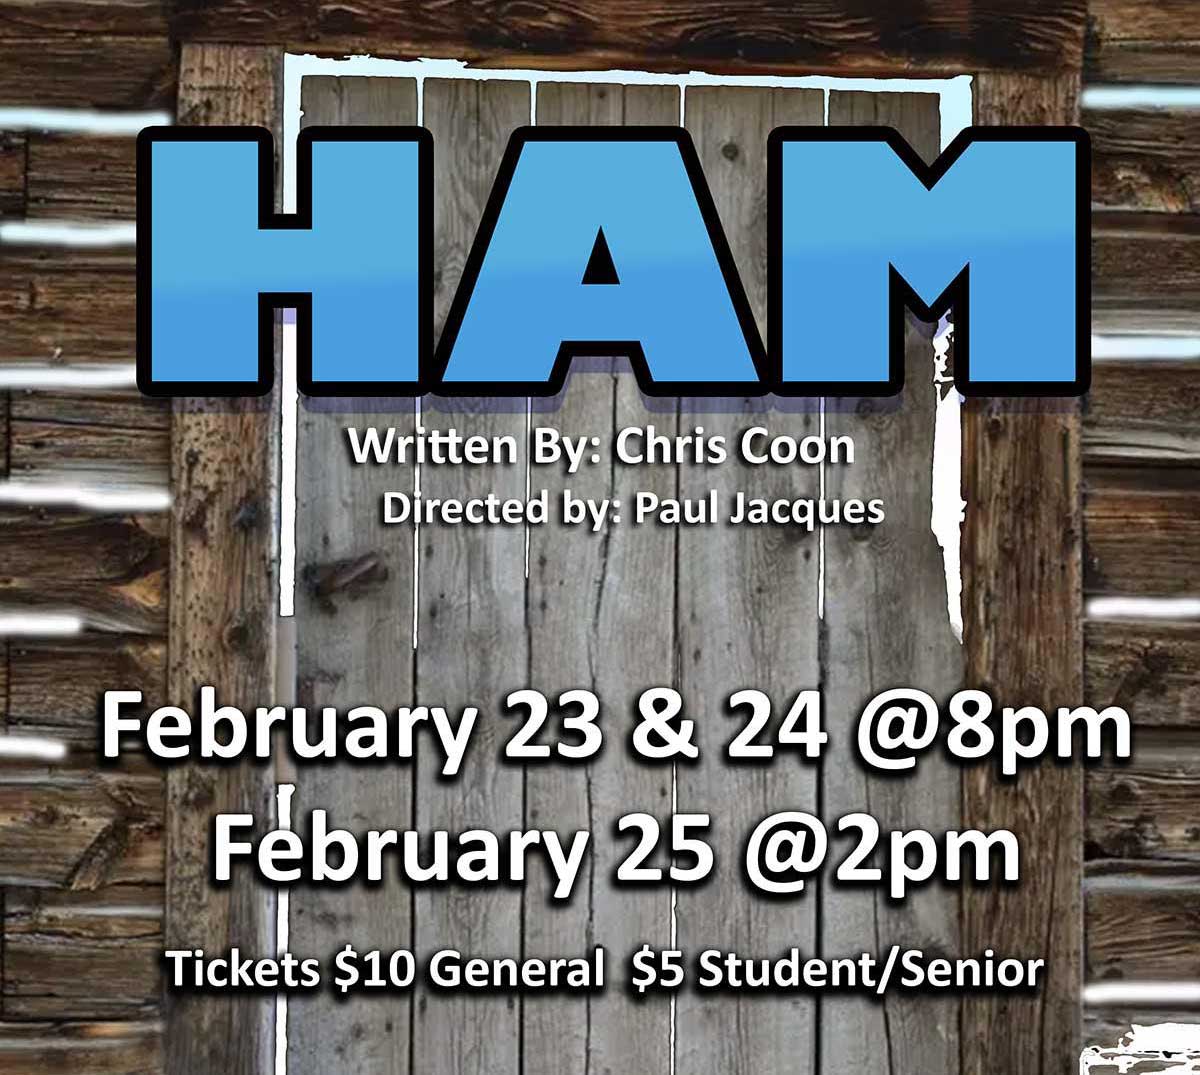 HAM. Written by Chris Coon. Directed by Paul Jacques. February 23 and 24 at 8pm. February 25 at 2pm. Tickets $10 General. $5 Student/Senior